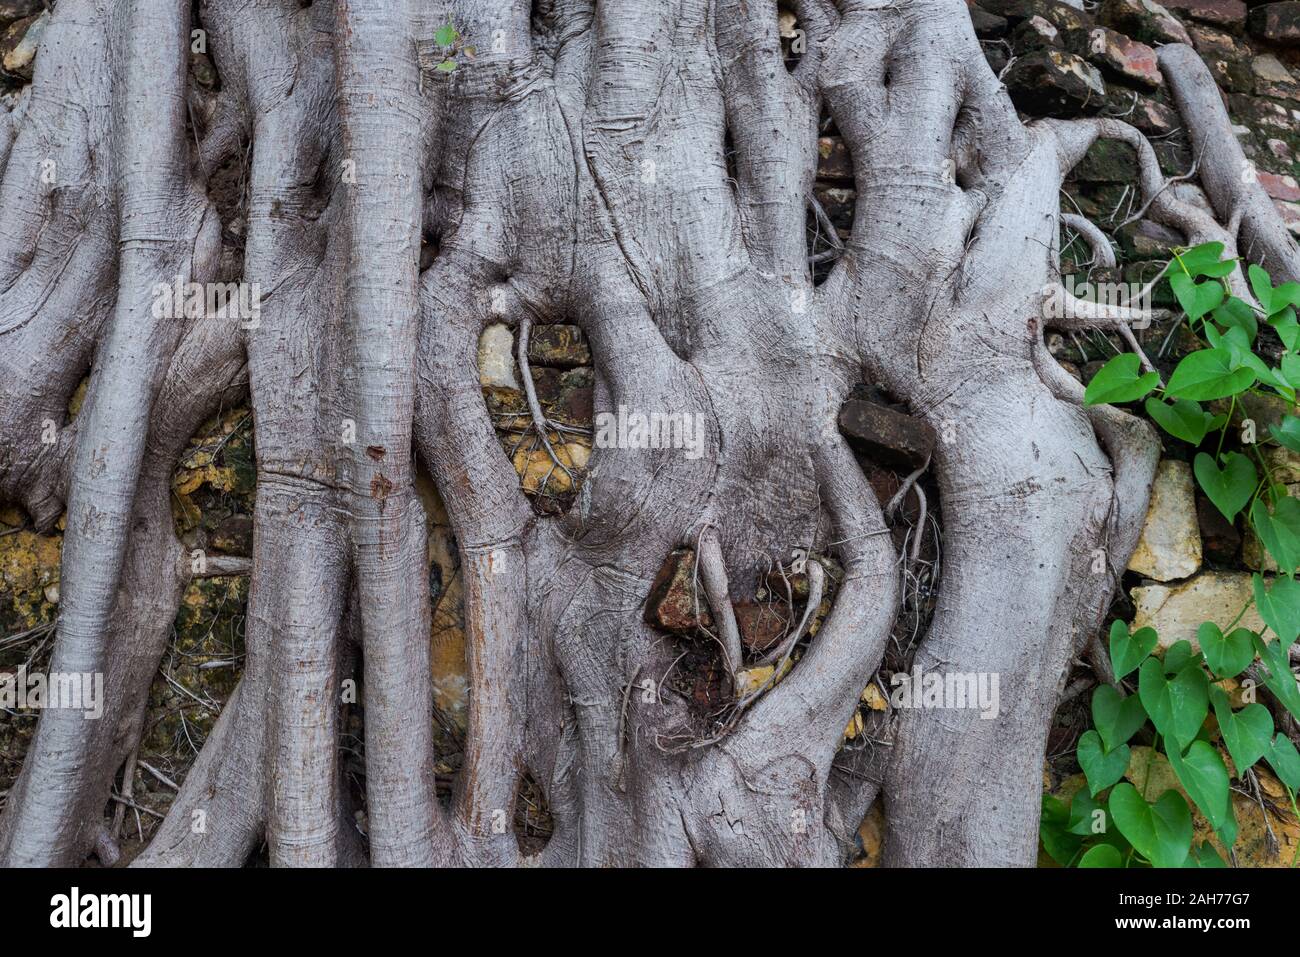 Detail of roots of big Banyan tree ingrown in brick wall in Puducherry, South India Stock Photo